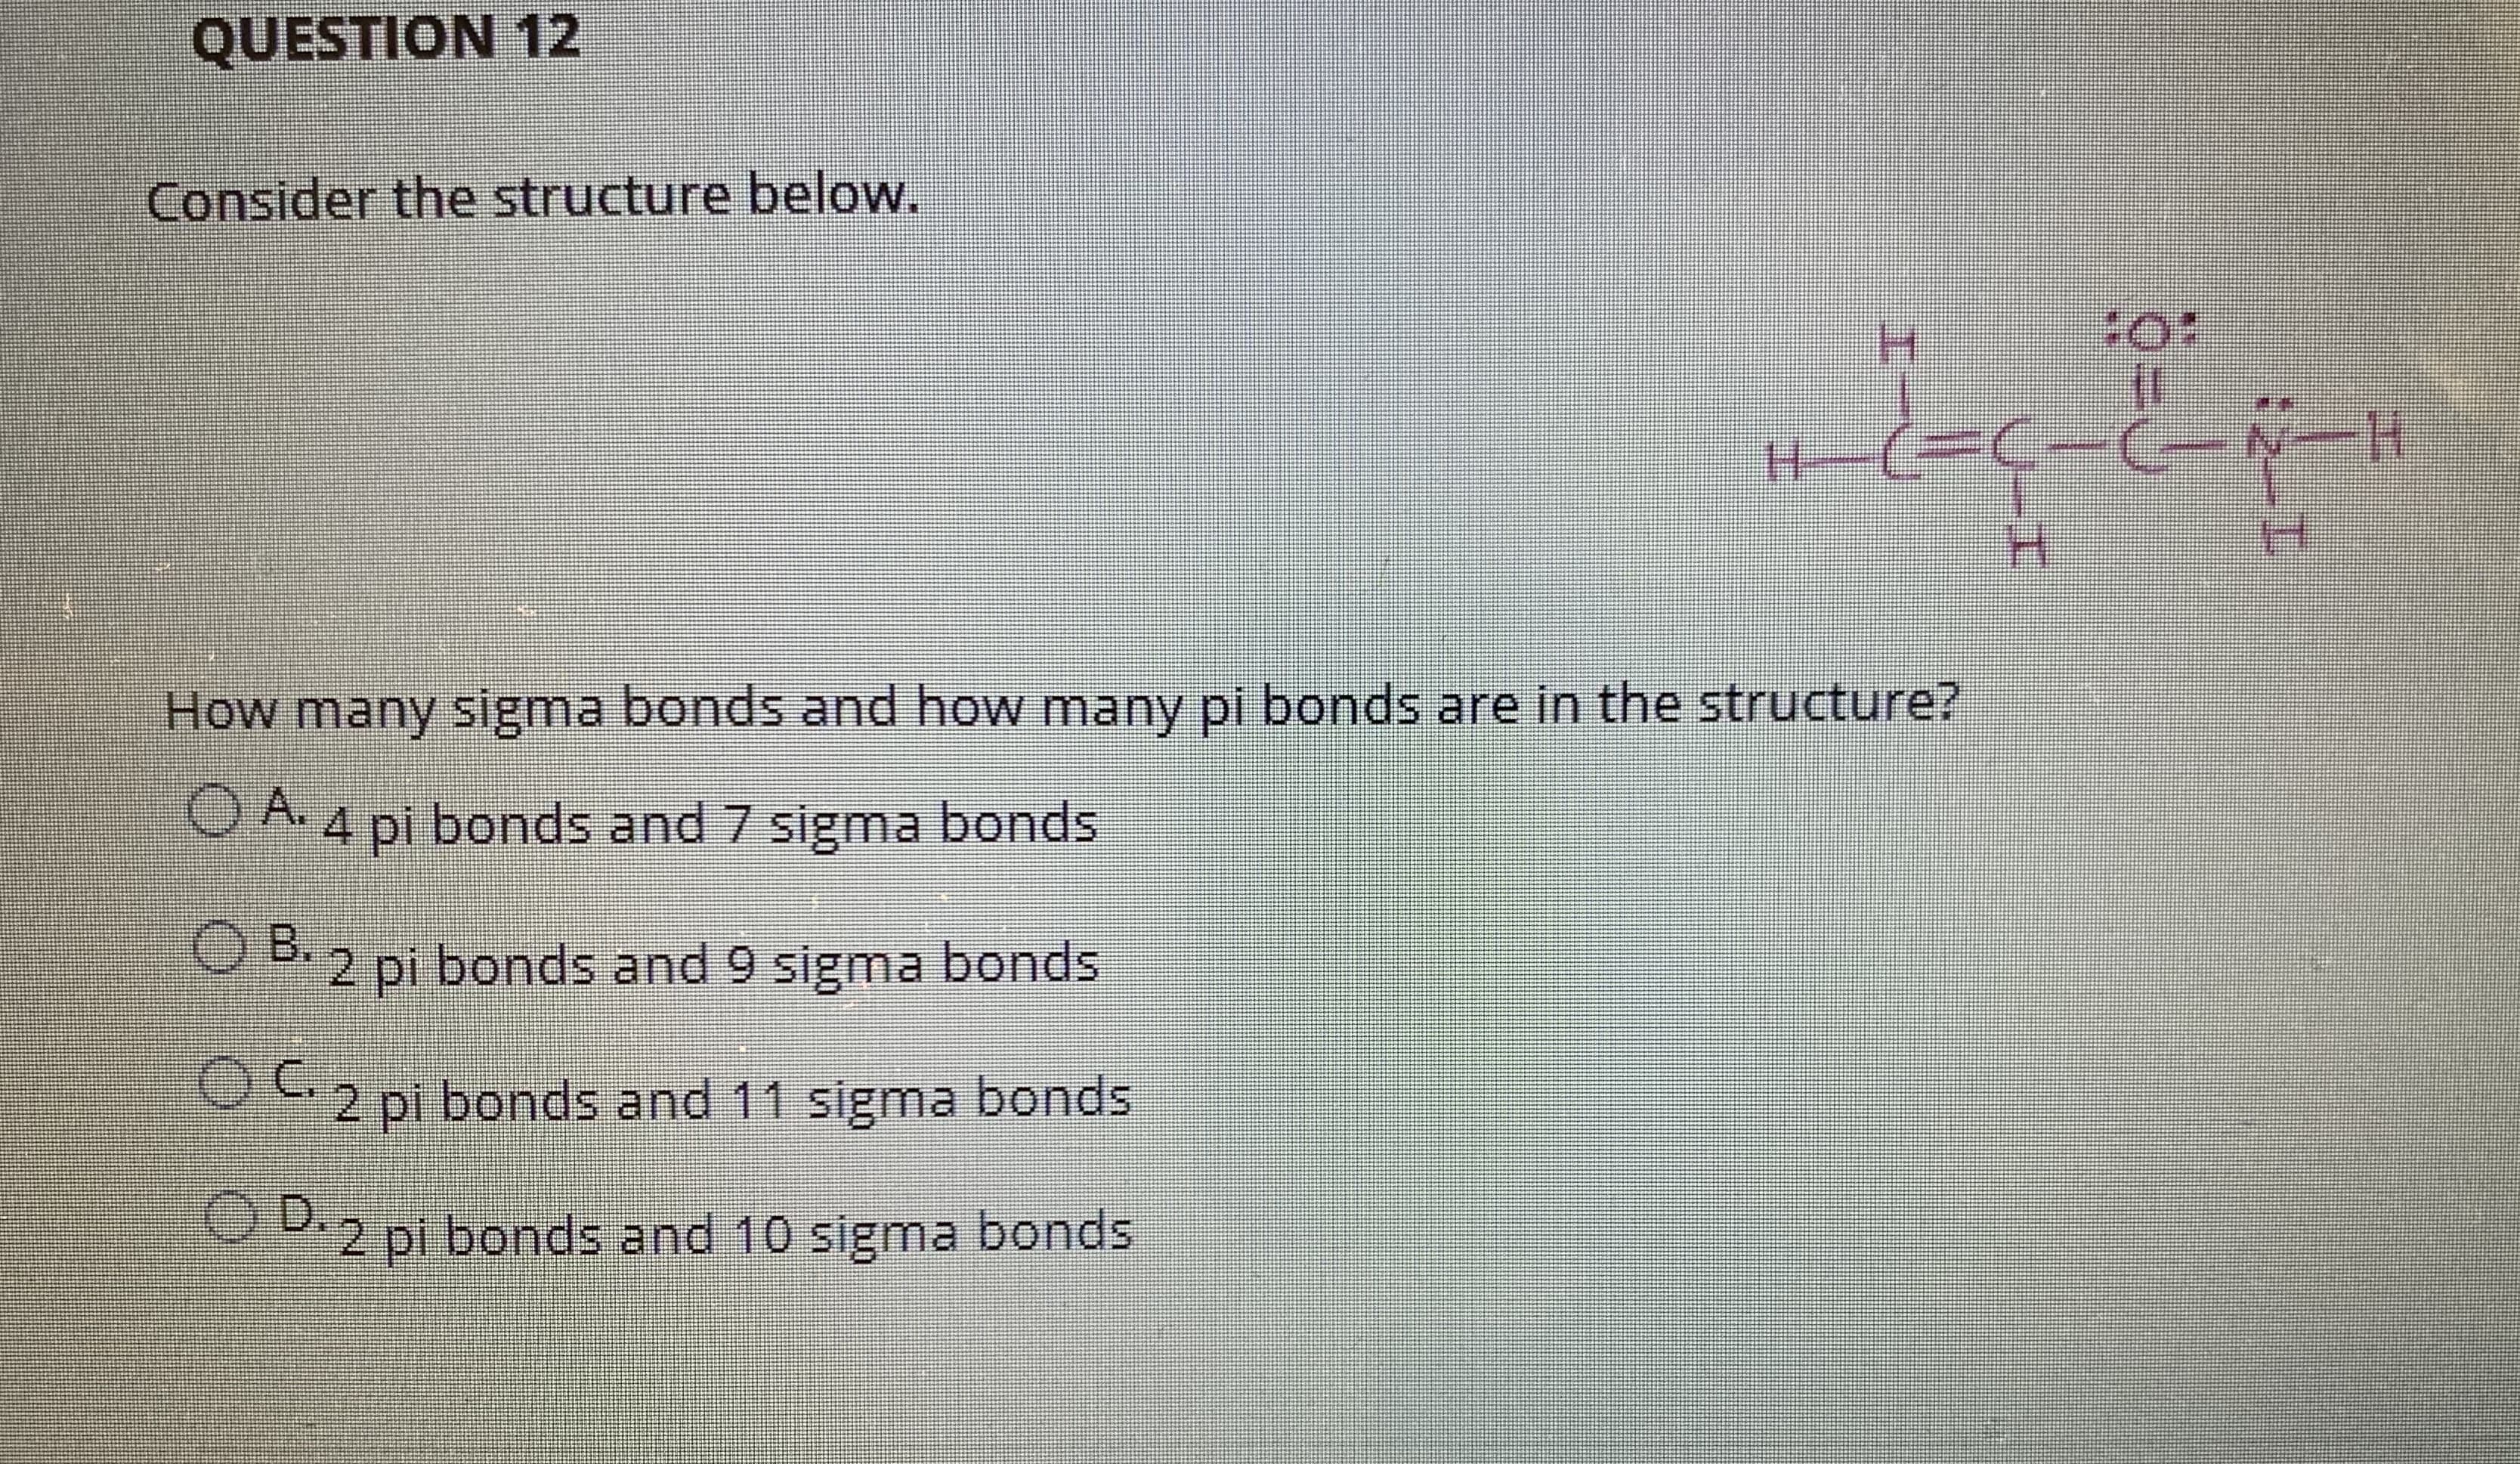 How many sigma bonds and how many pi bonds are in the structure?
